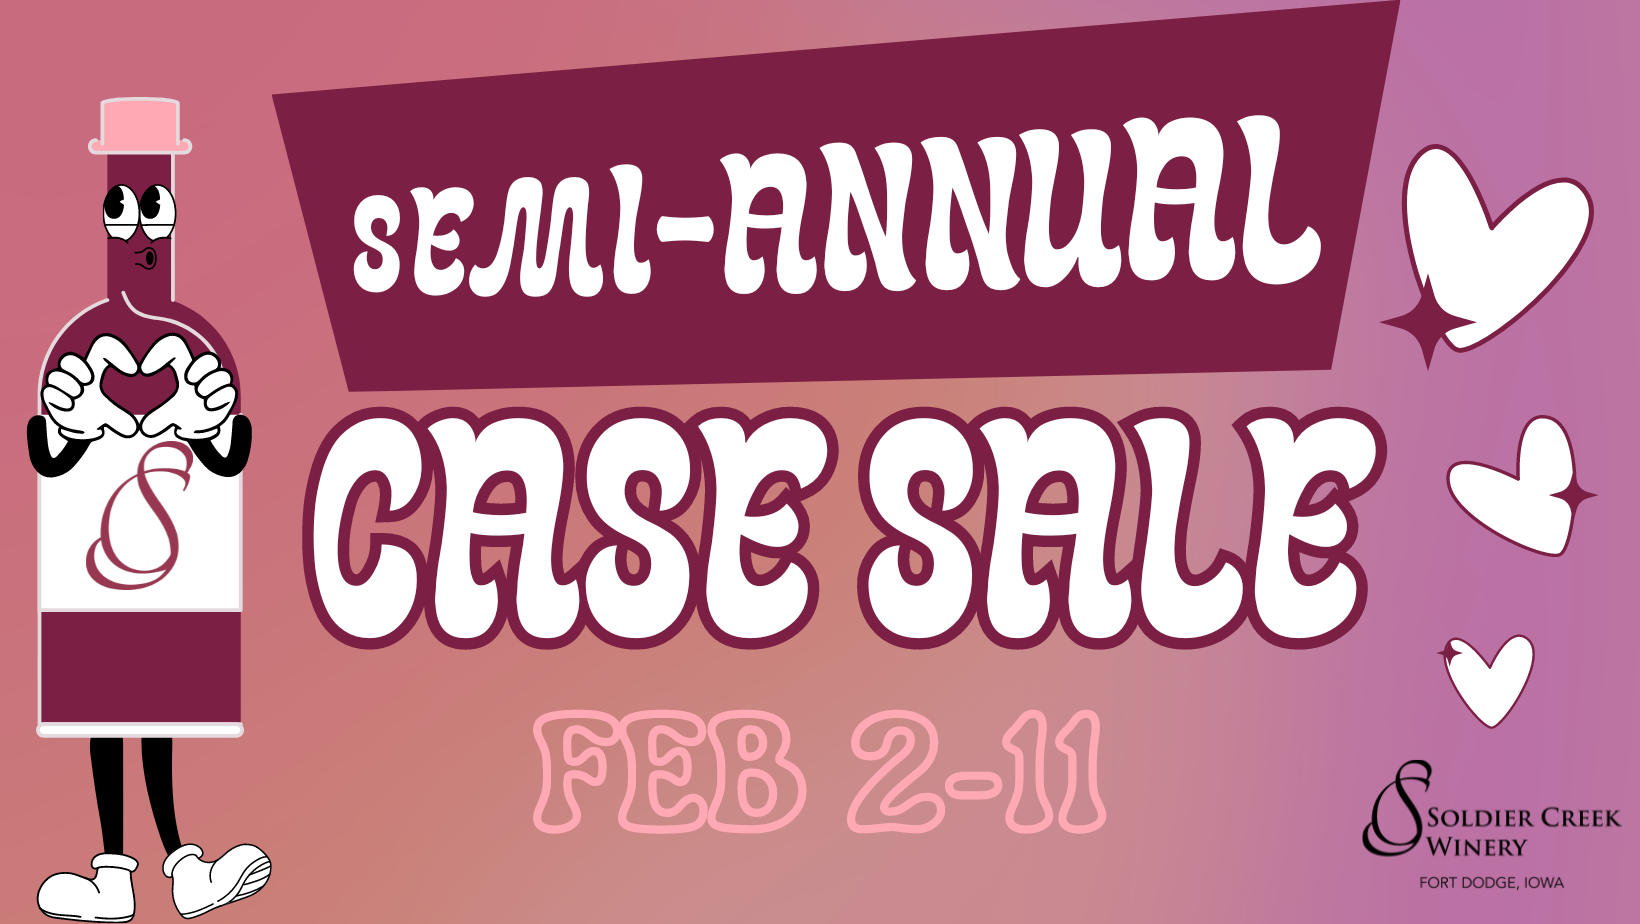 semi-annual case sale at soldier creek winery from february 2-11